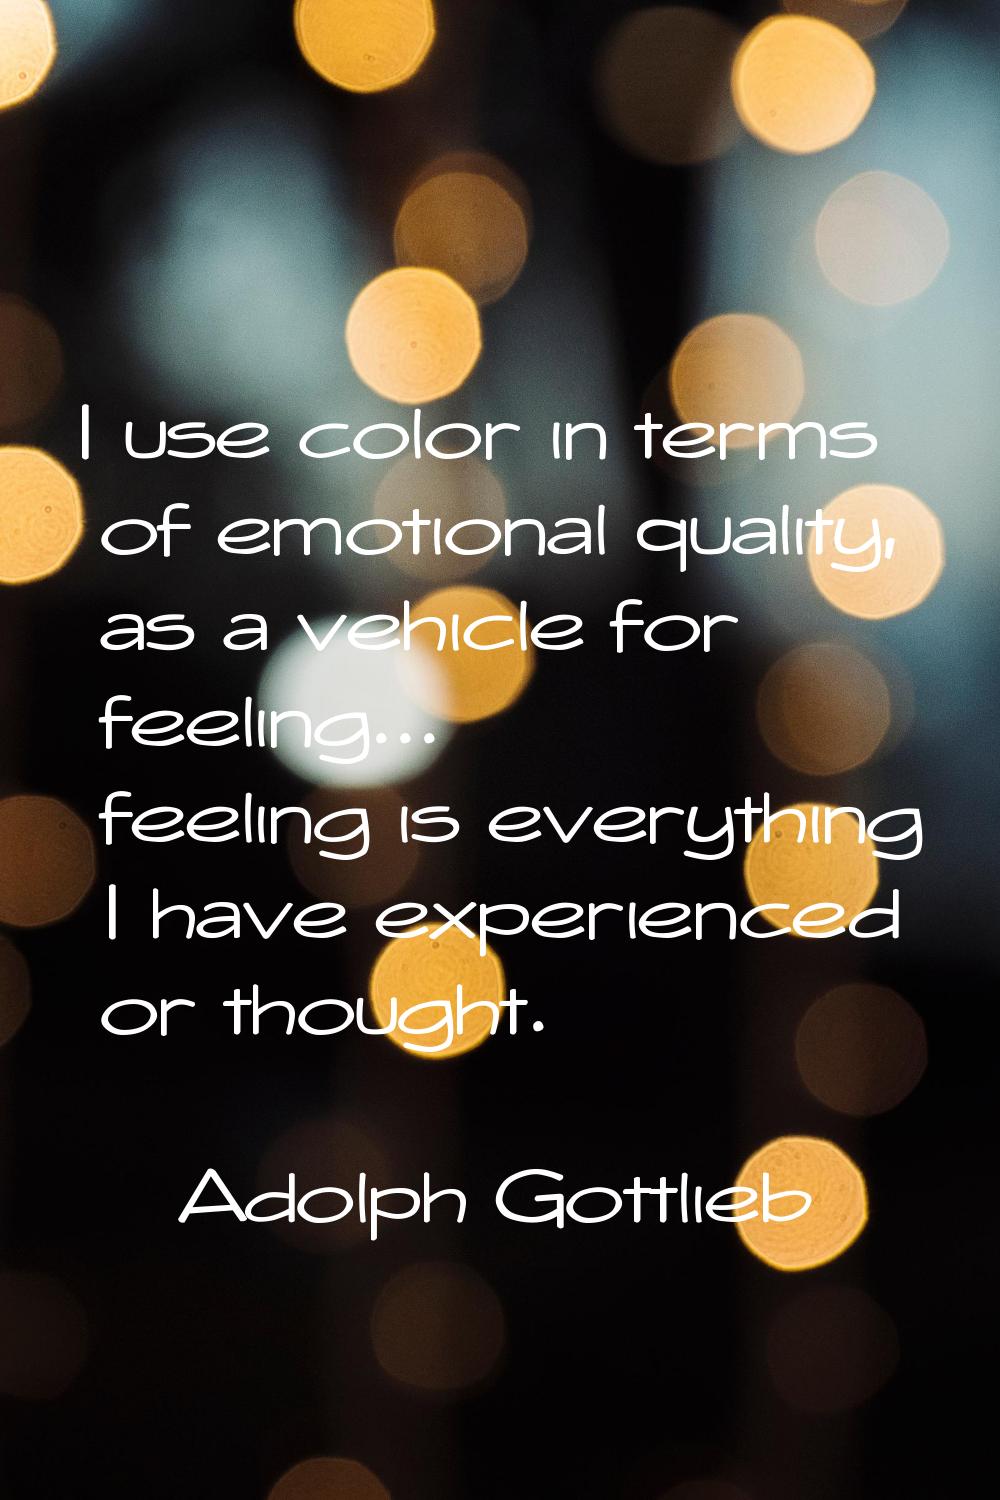 I use color in terms of emotional quality, as a vehicle for feeling... feeling is everything I have